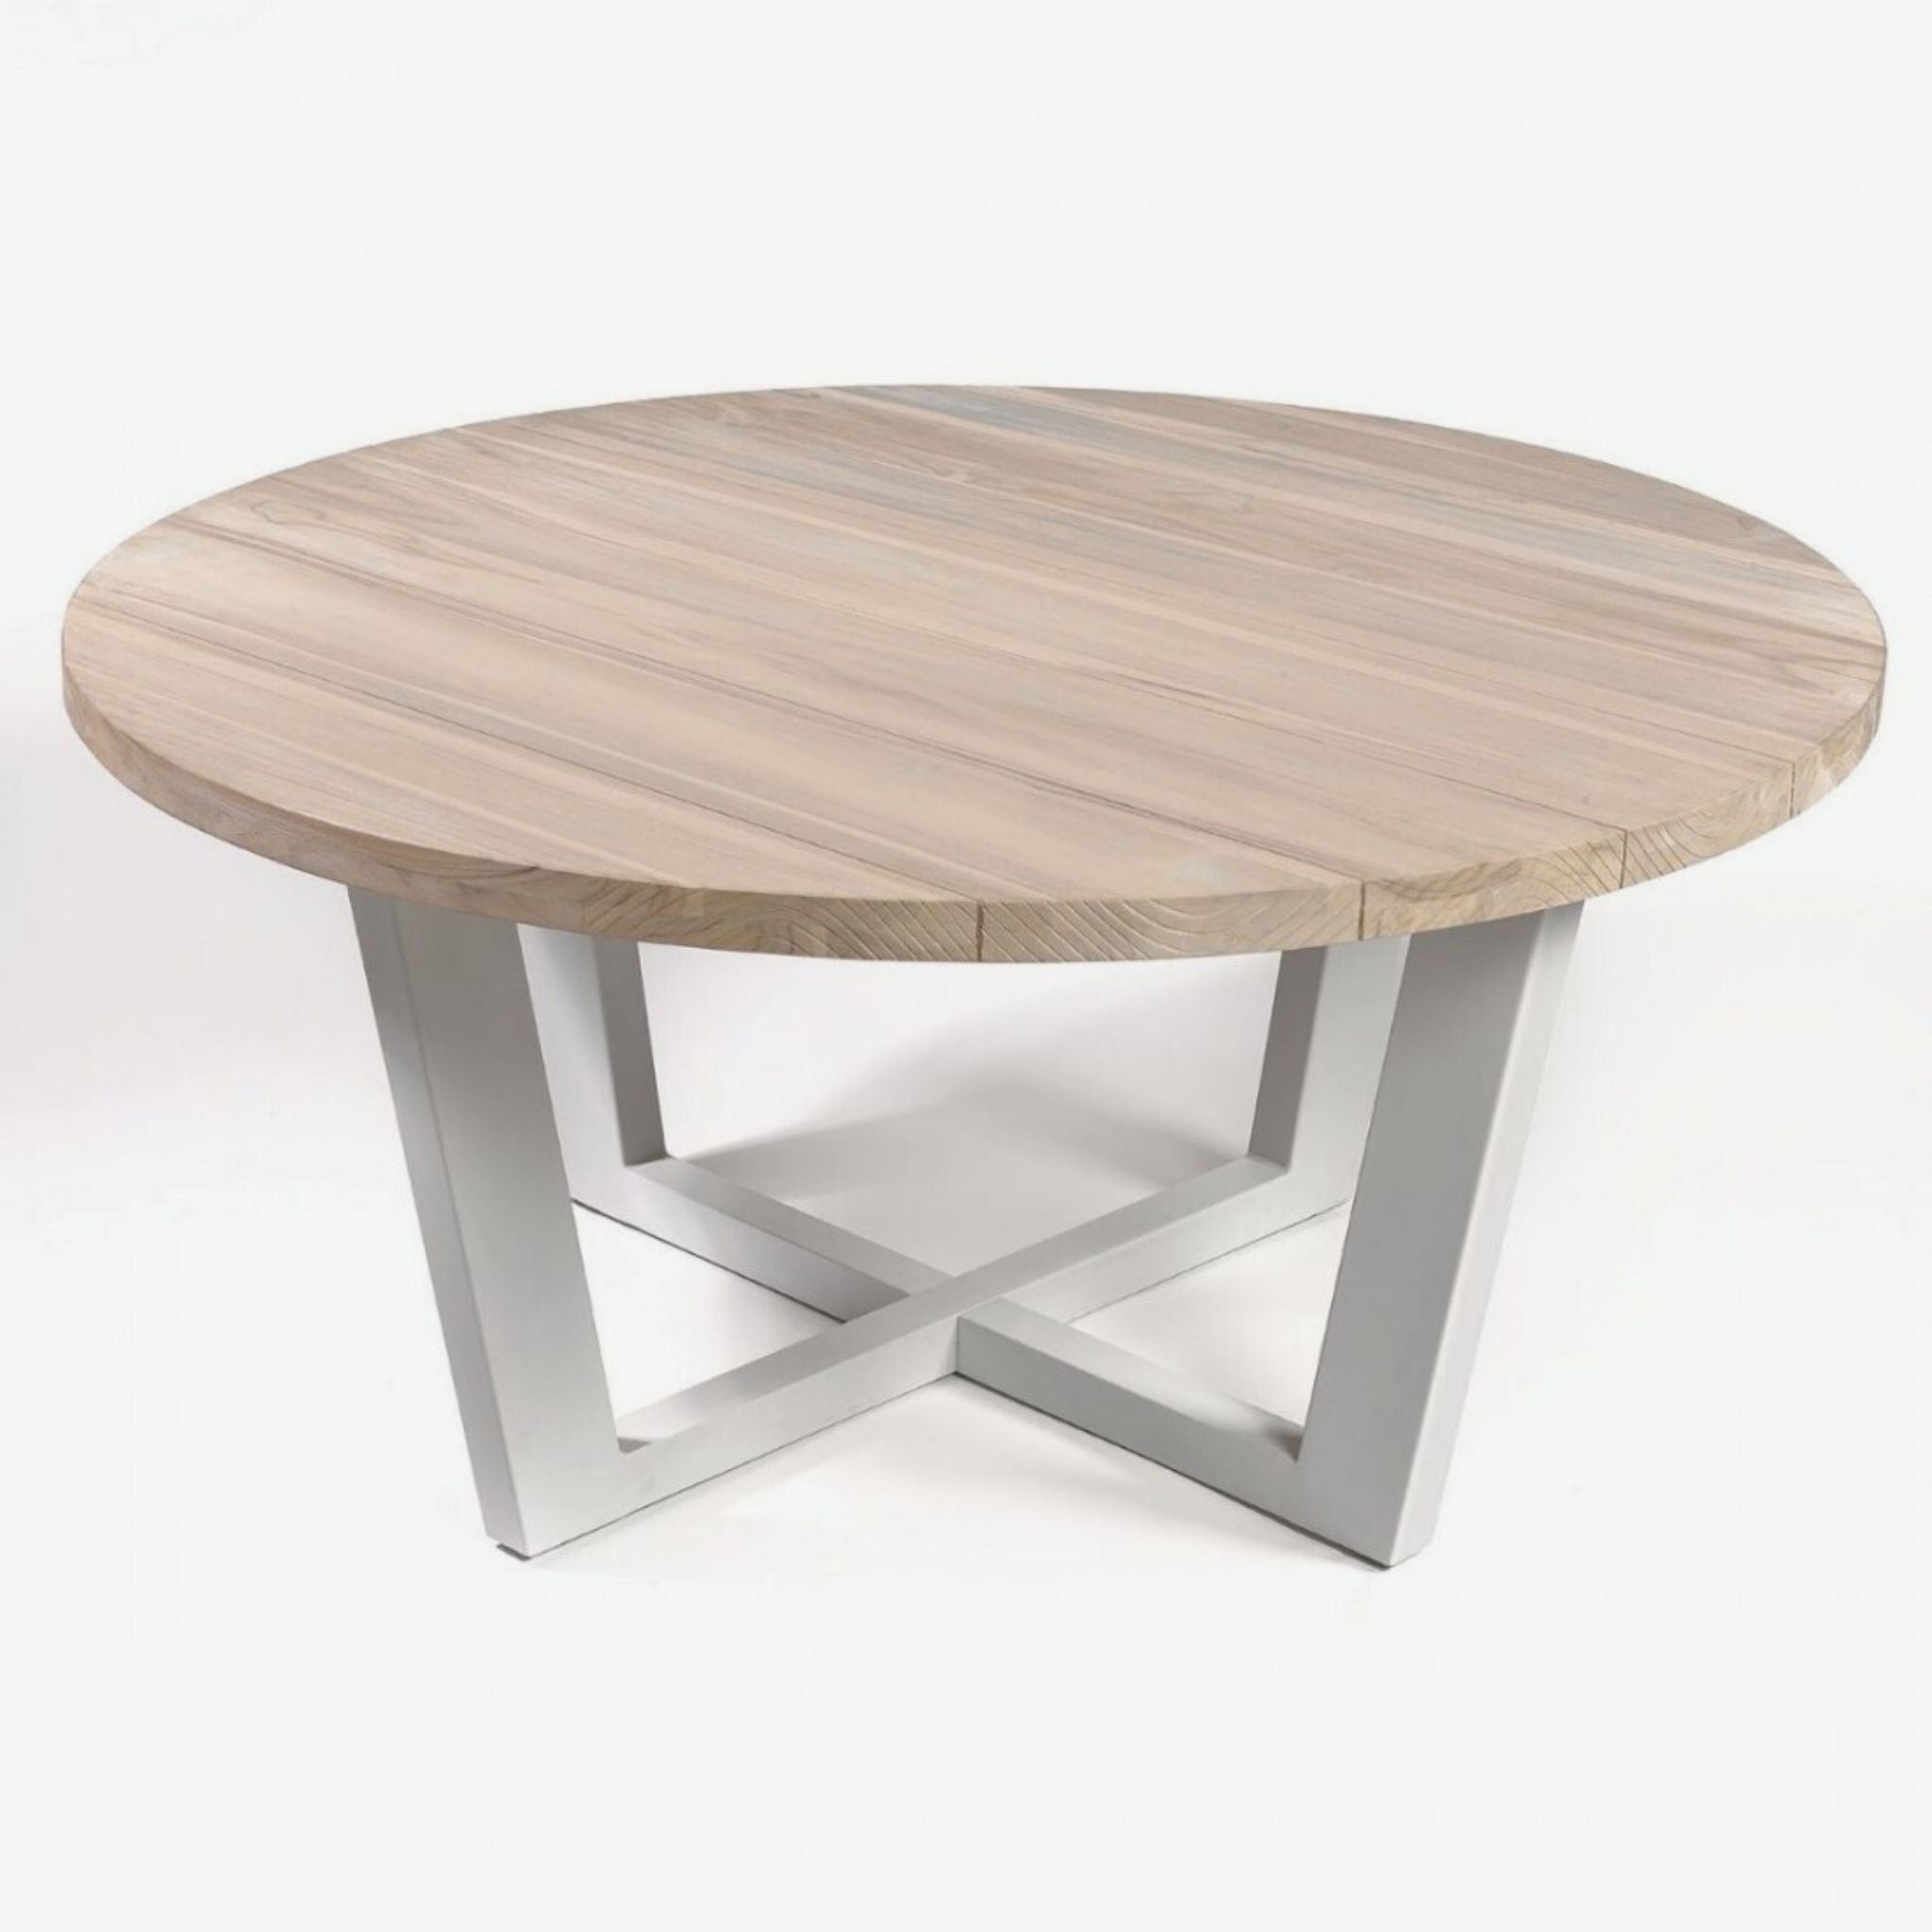 Crisal Decoracion Ivory Round Wooden Outdoor Dining Table with Taupe Tone Metal Leg - ModernistaLiving